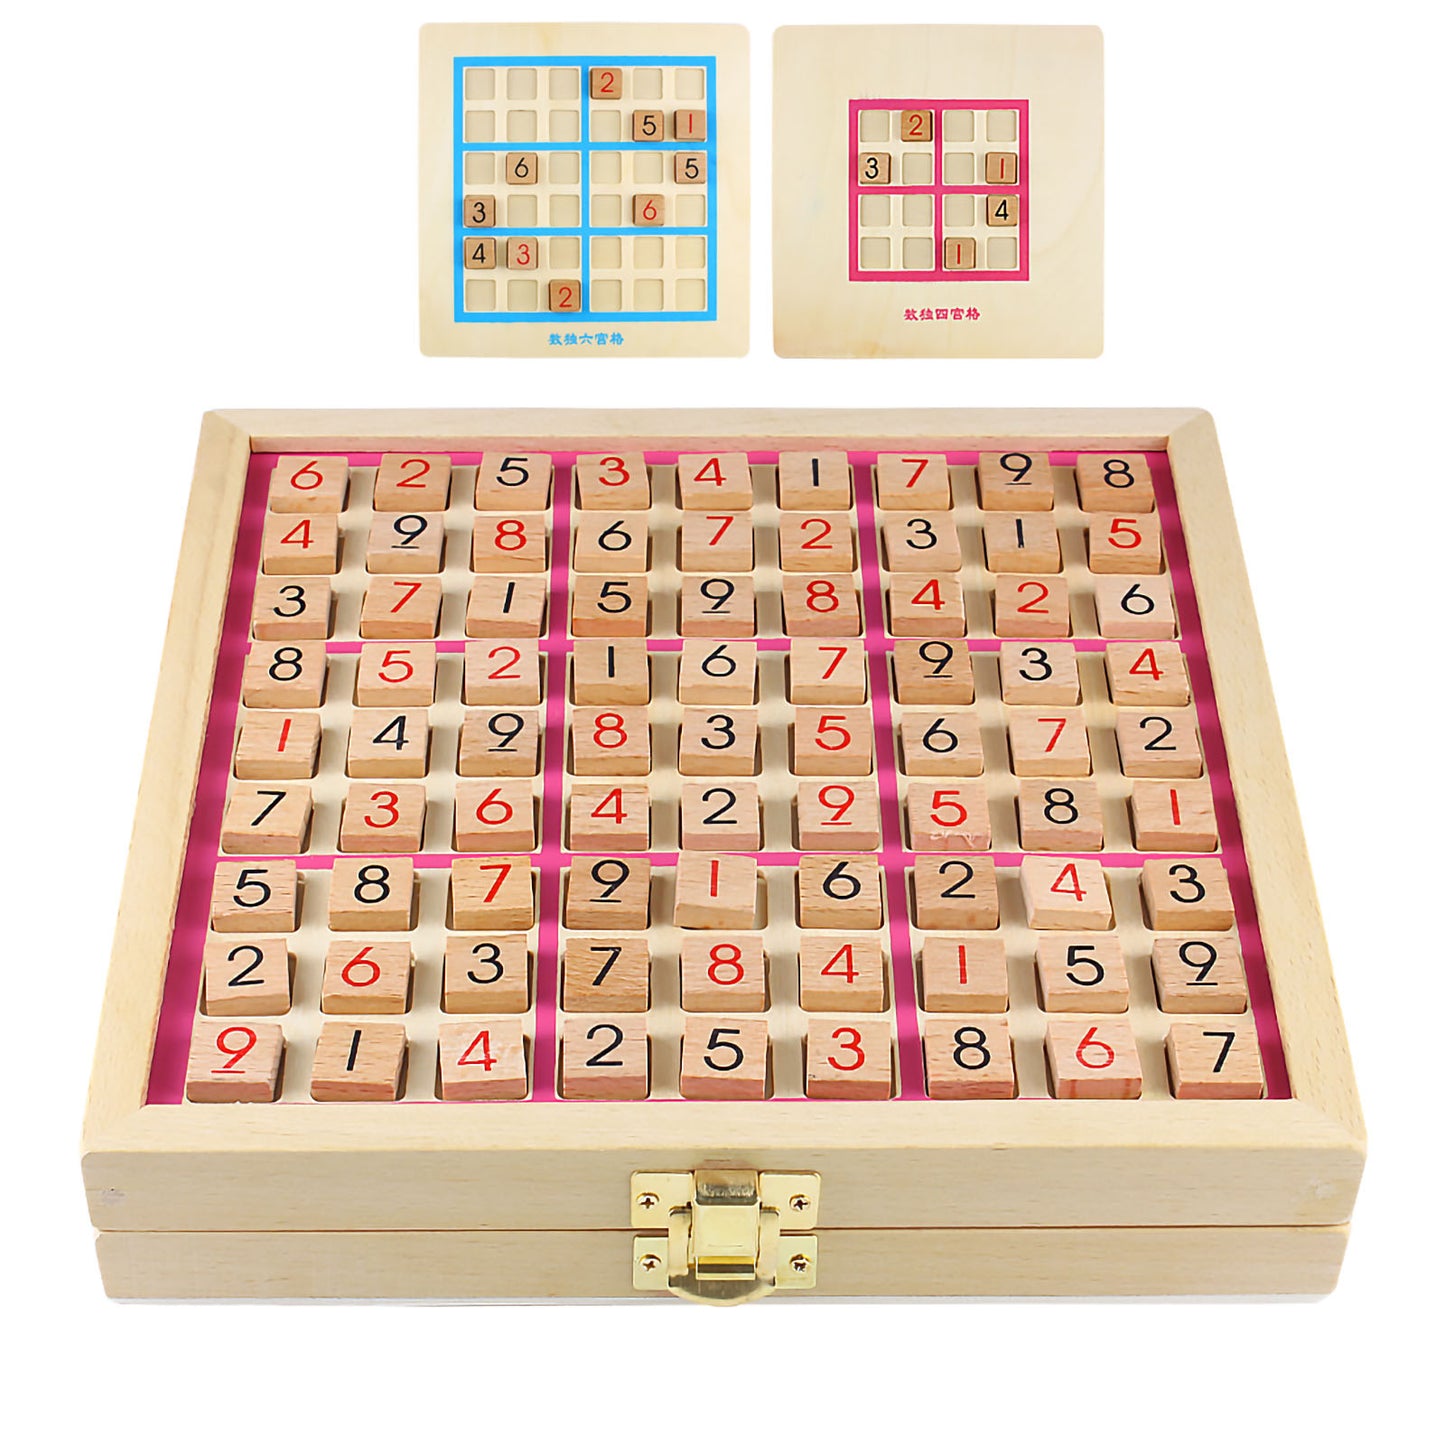 Andux Sudoku Board Box 3-in-1 Toy SD-03 (Pink)